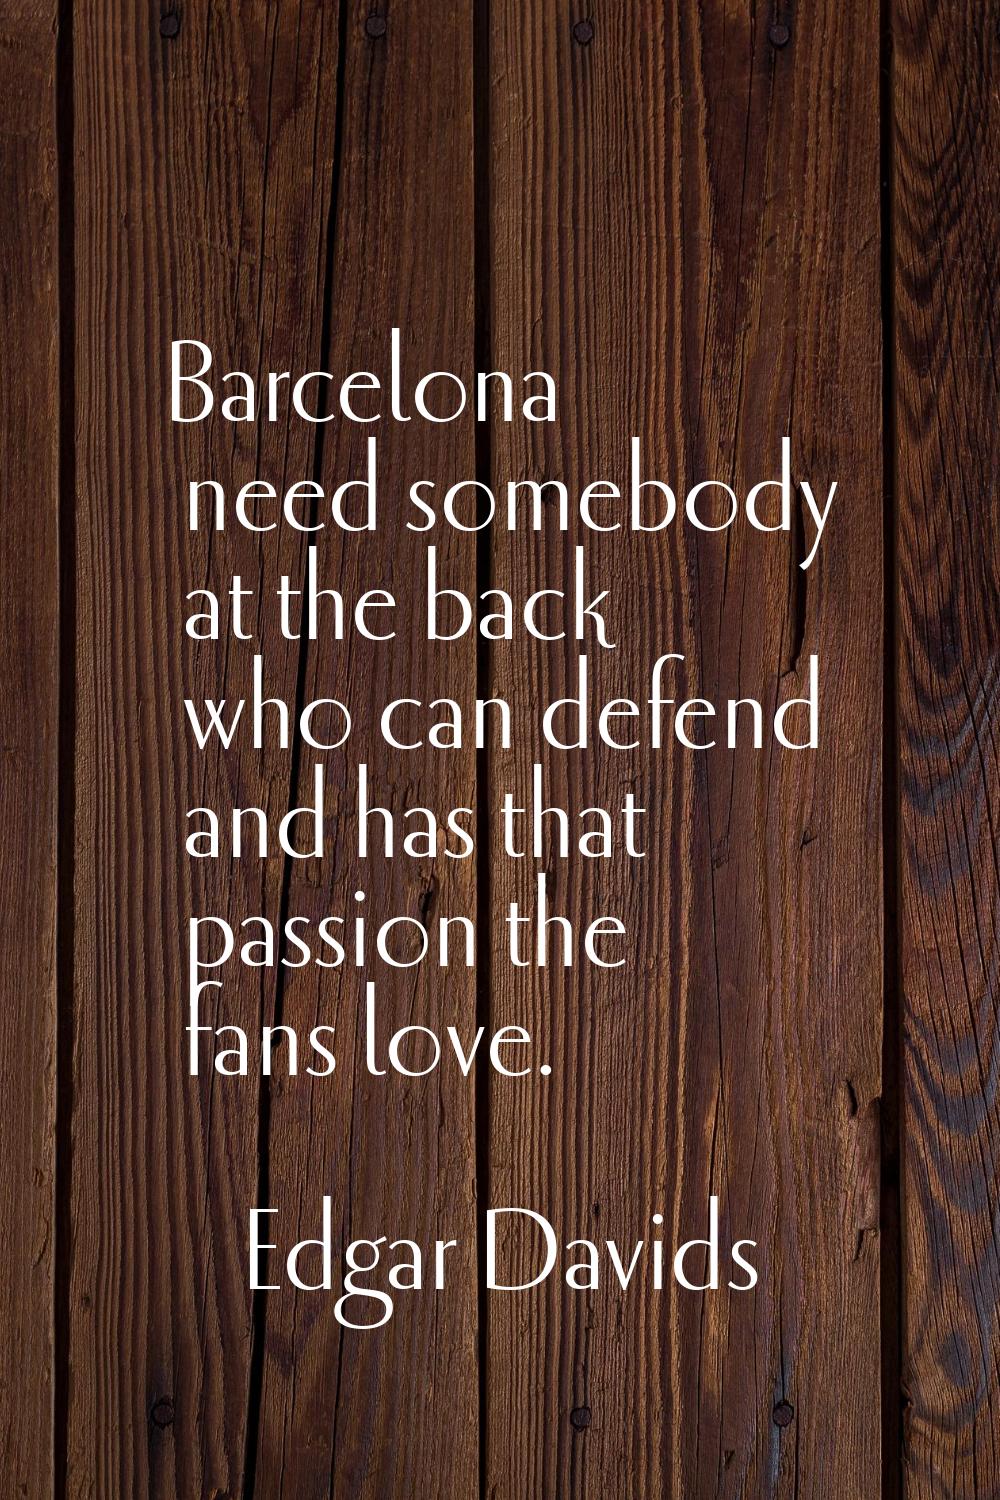 Barcelona need somebody at the back who can defend and has that passion the fans love.